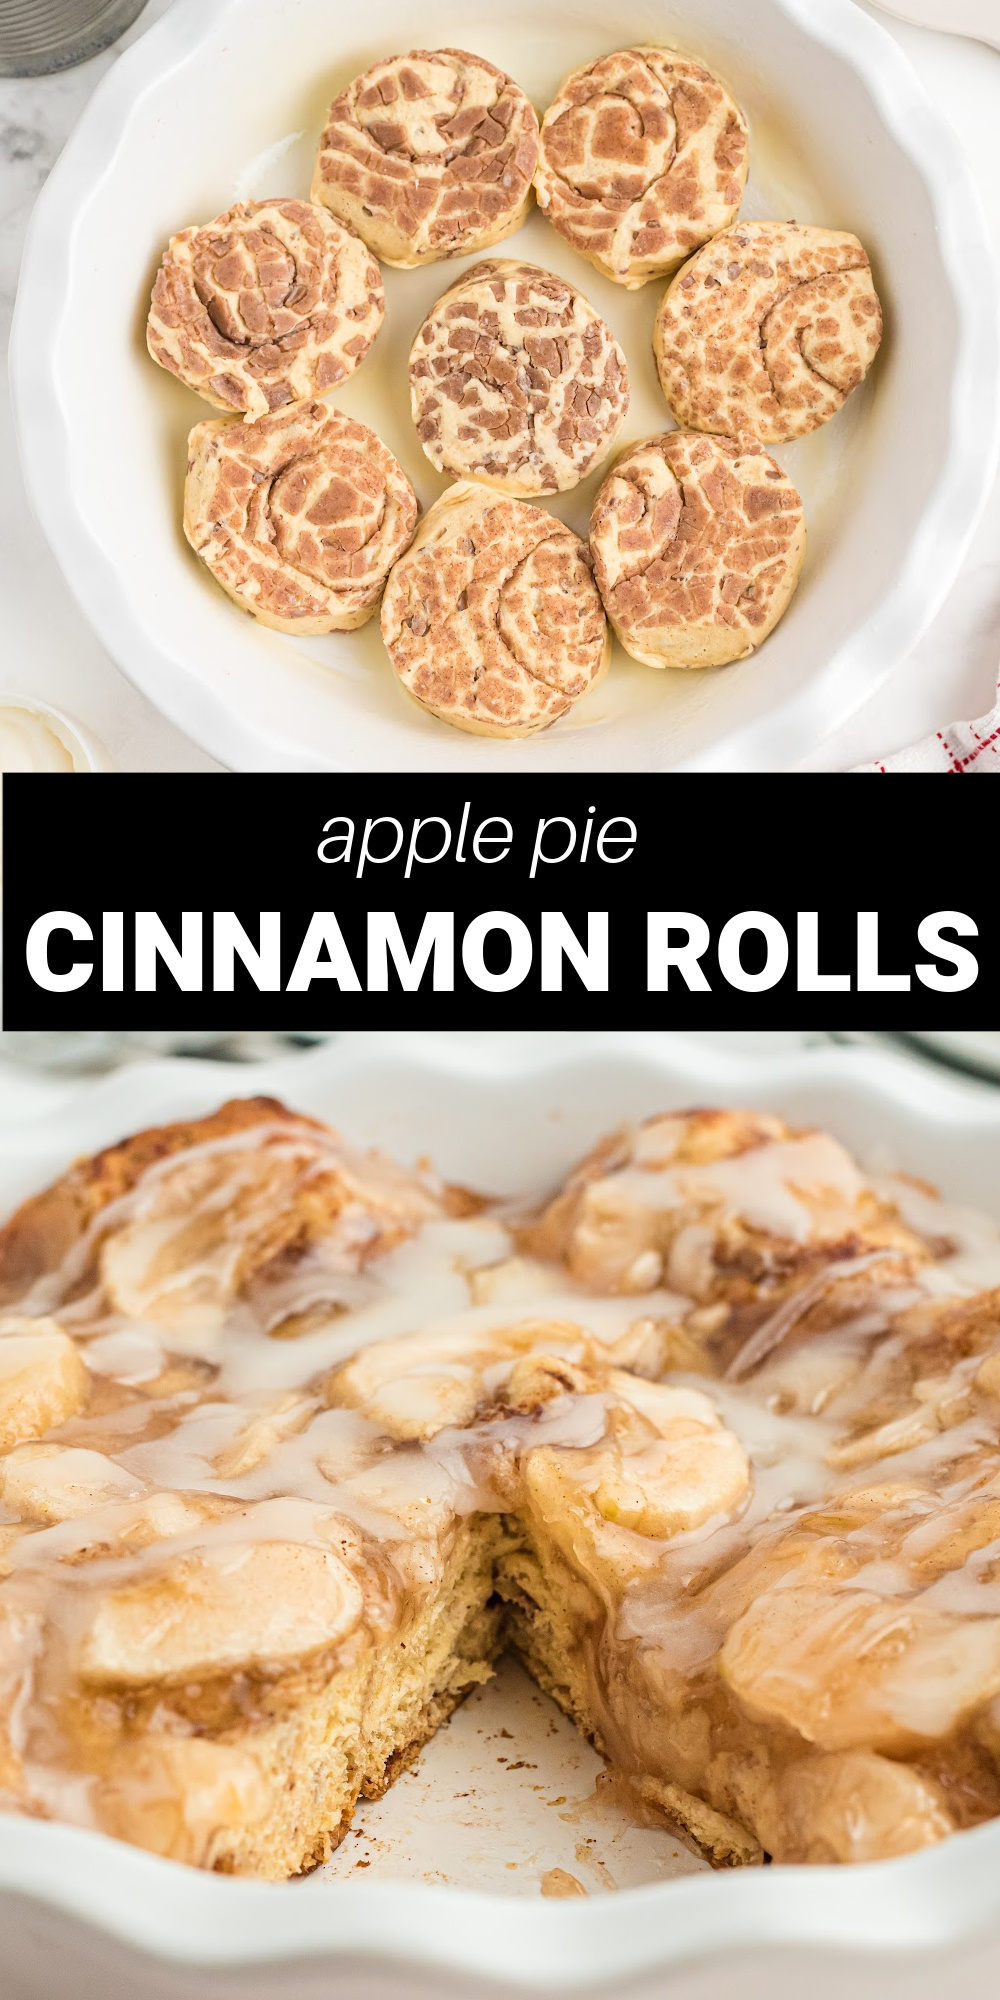 Apple and cinnamon are two of the most common flavor combos. In this Cinnamon Roll Apple Bake, fluffy cinnamon rolls are topped with delicious apple pie filling, baked to perfection, and then finished with rich and creamy icing! It's a winning treat the whole family will love, whenever you have it.